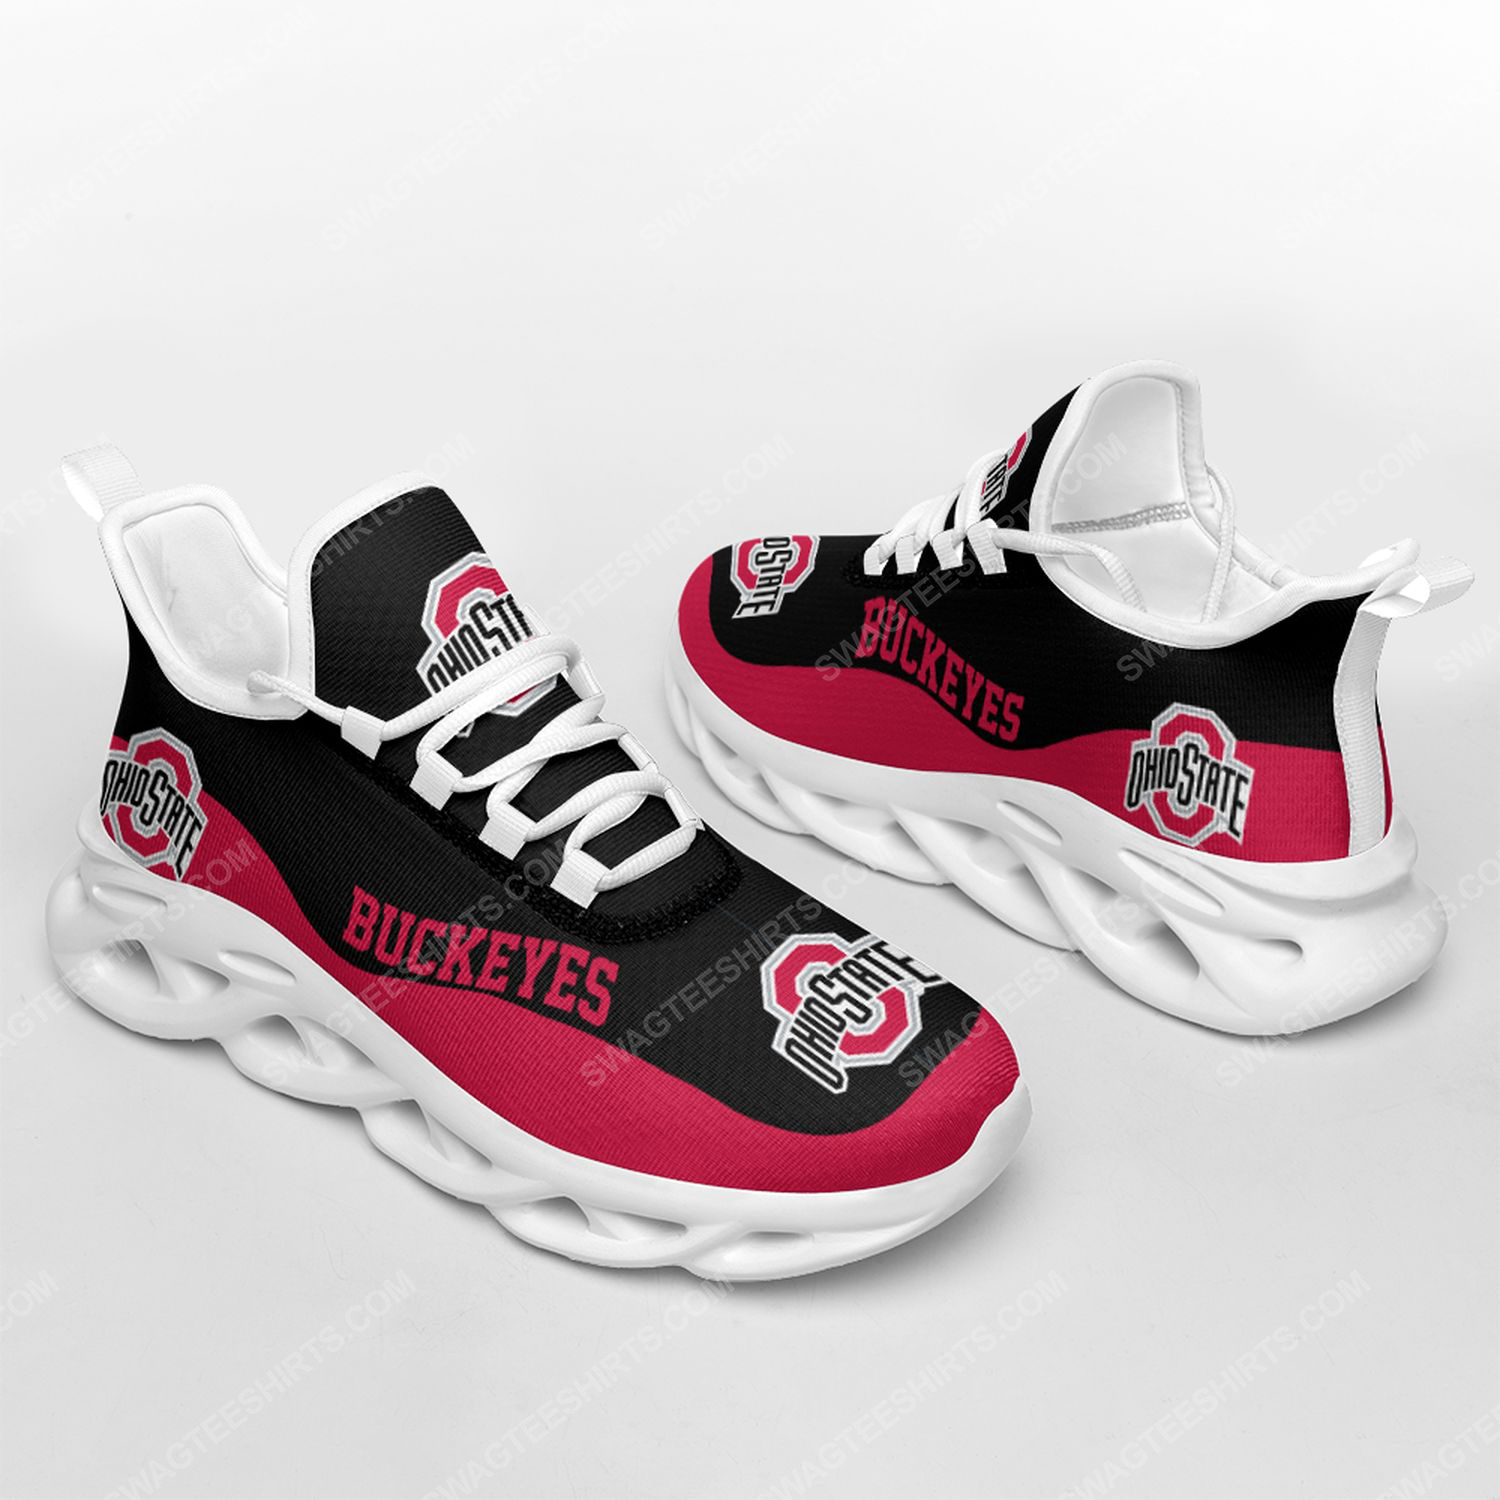 [special edition] Ohio state buckeyes football team max soul shoes – Maria